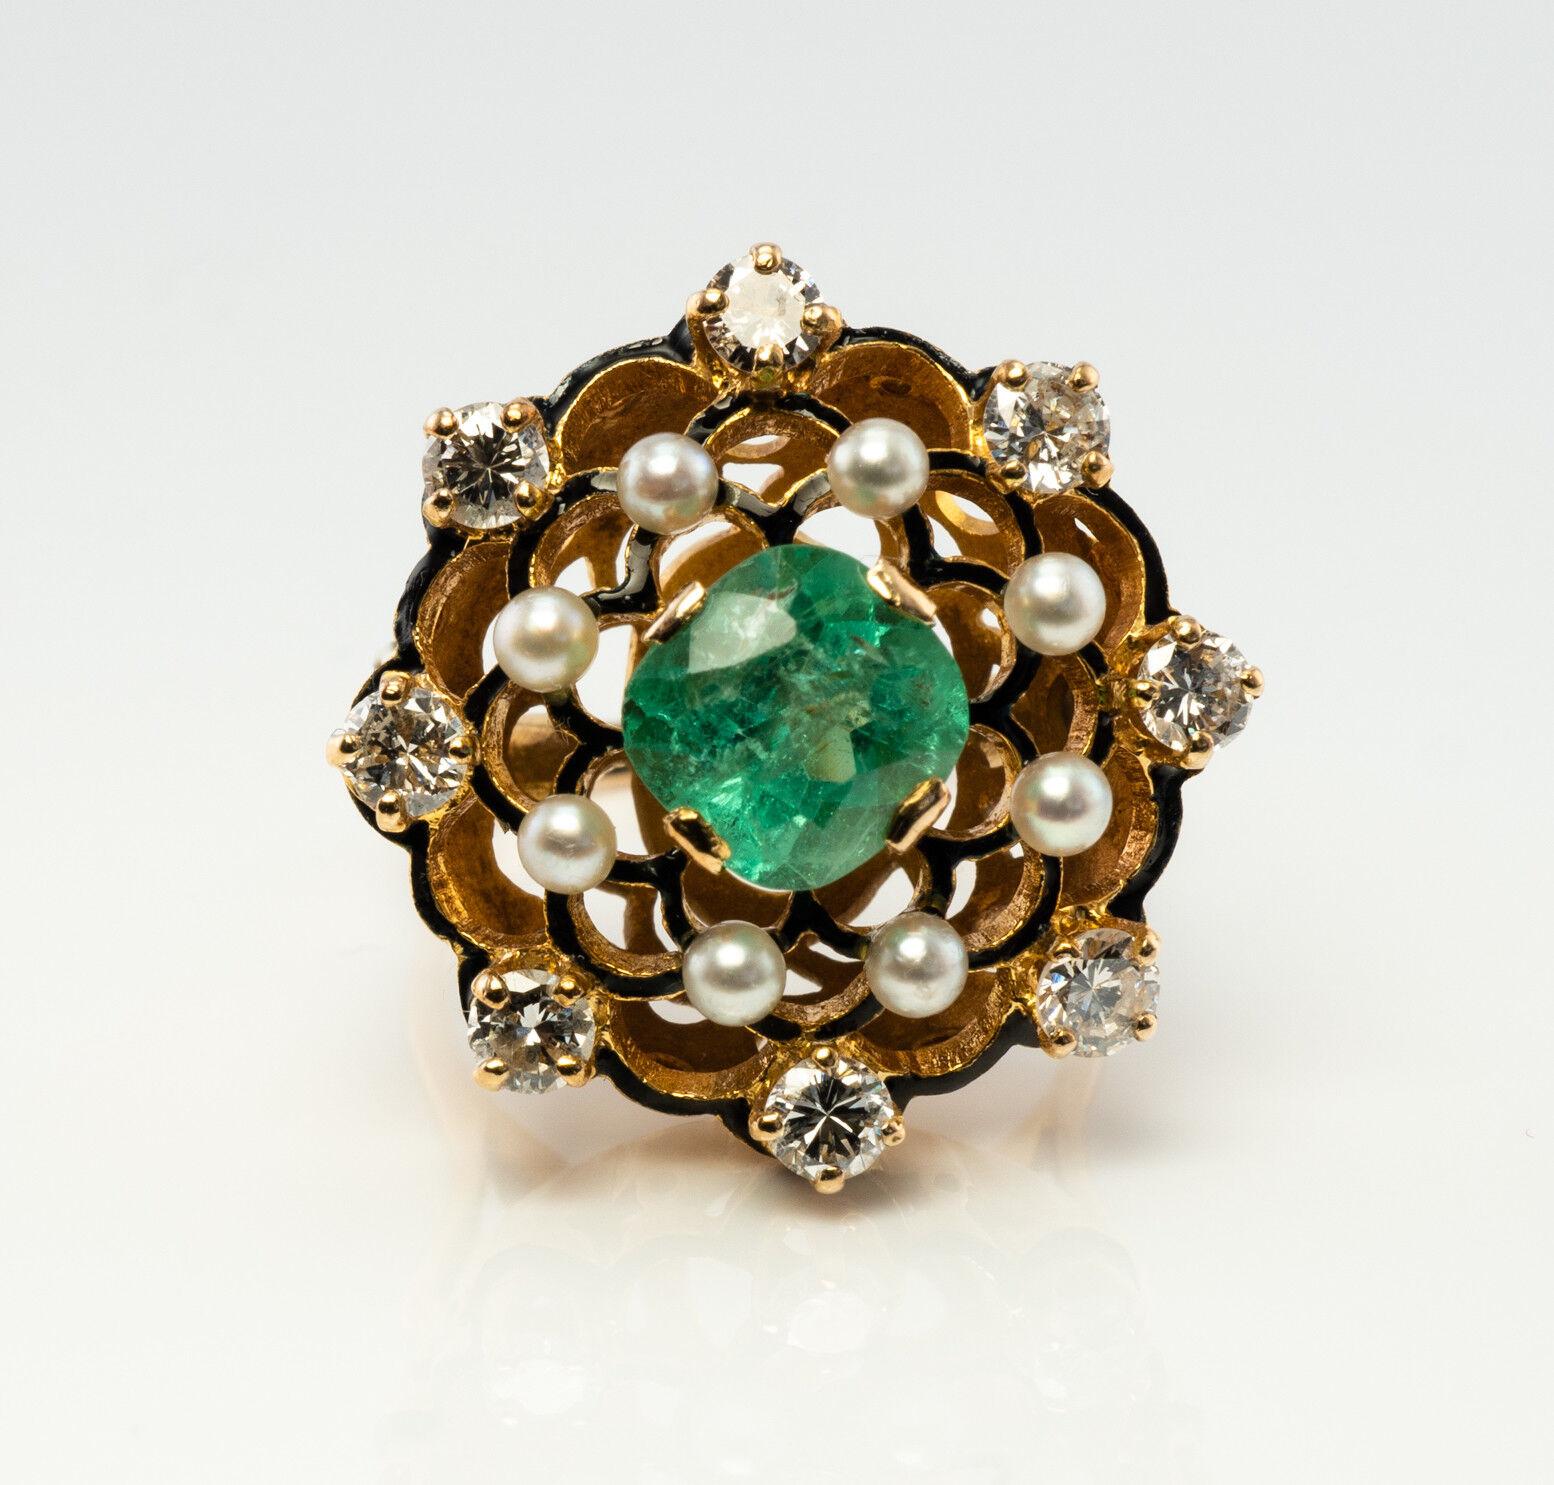 This gorgeous vintage ring is finely crafted in solid 14K Yellow Gold and set with genuine Earth mined Colombian Emerald, white and fiery diamonds, and natural cultured pearls. The center Emerald measures 7mm x 7mm (1.20 carats) and this is a good